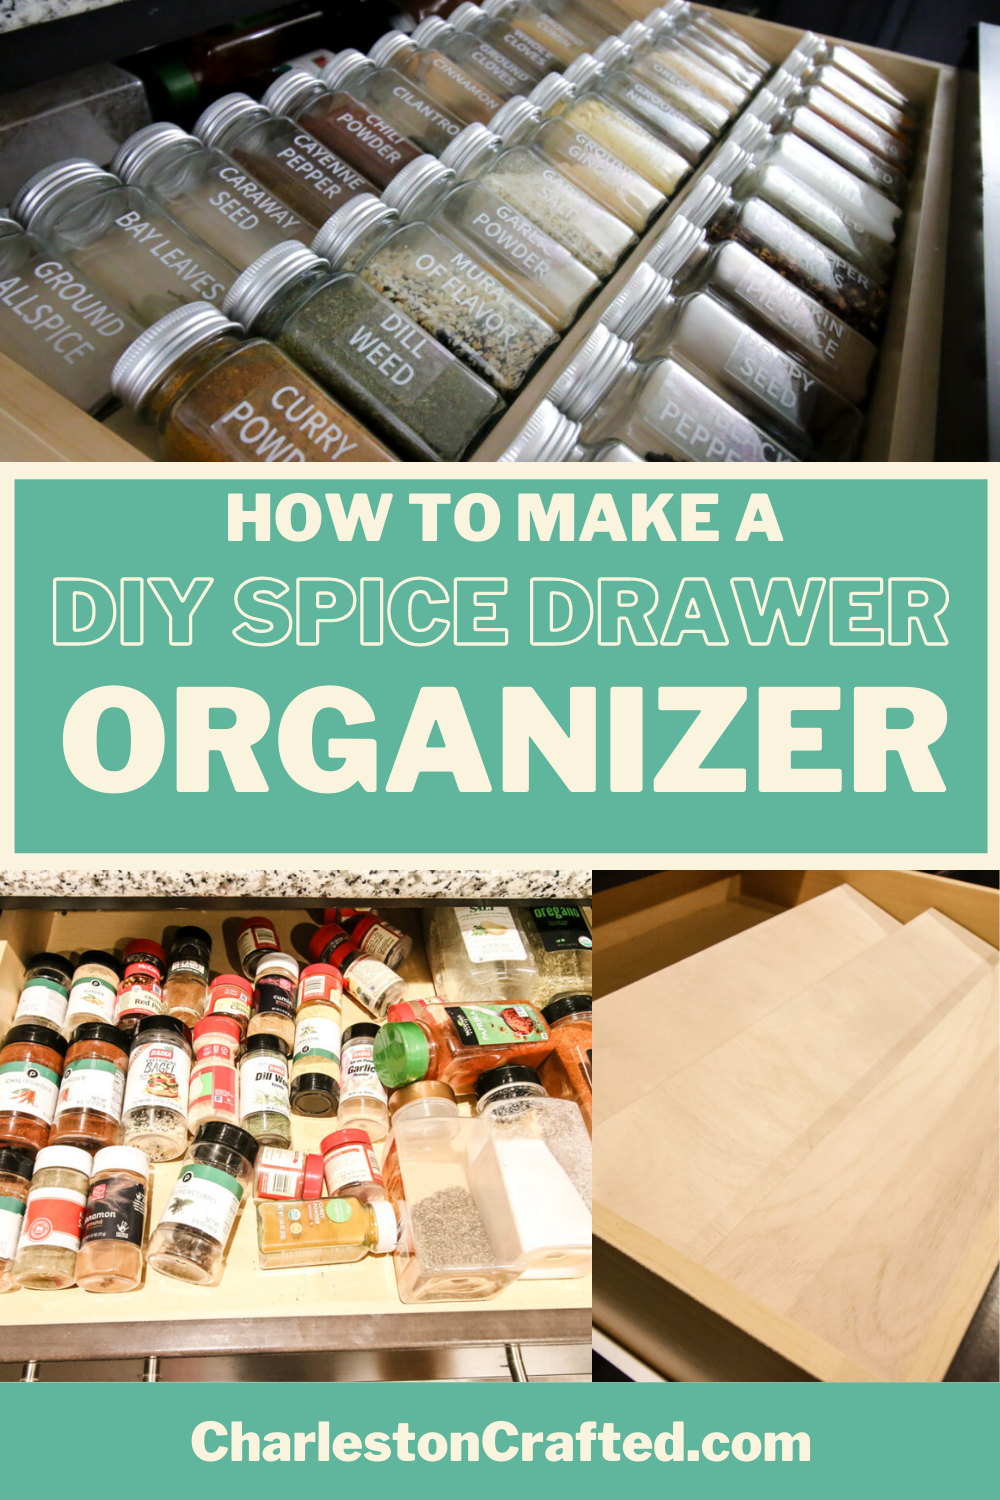 https://www.charlestoncrafted.com/wp-content/uploads/2021/11/Spice-drawer-organizer-pinterest.png